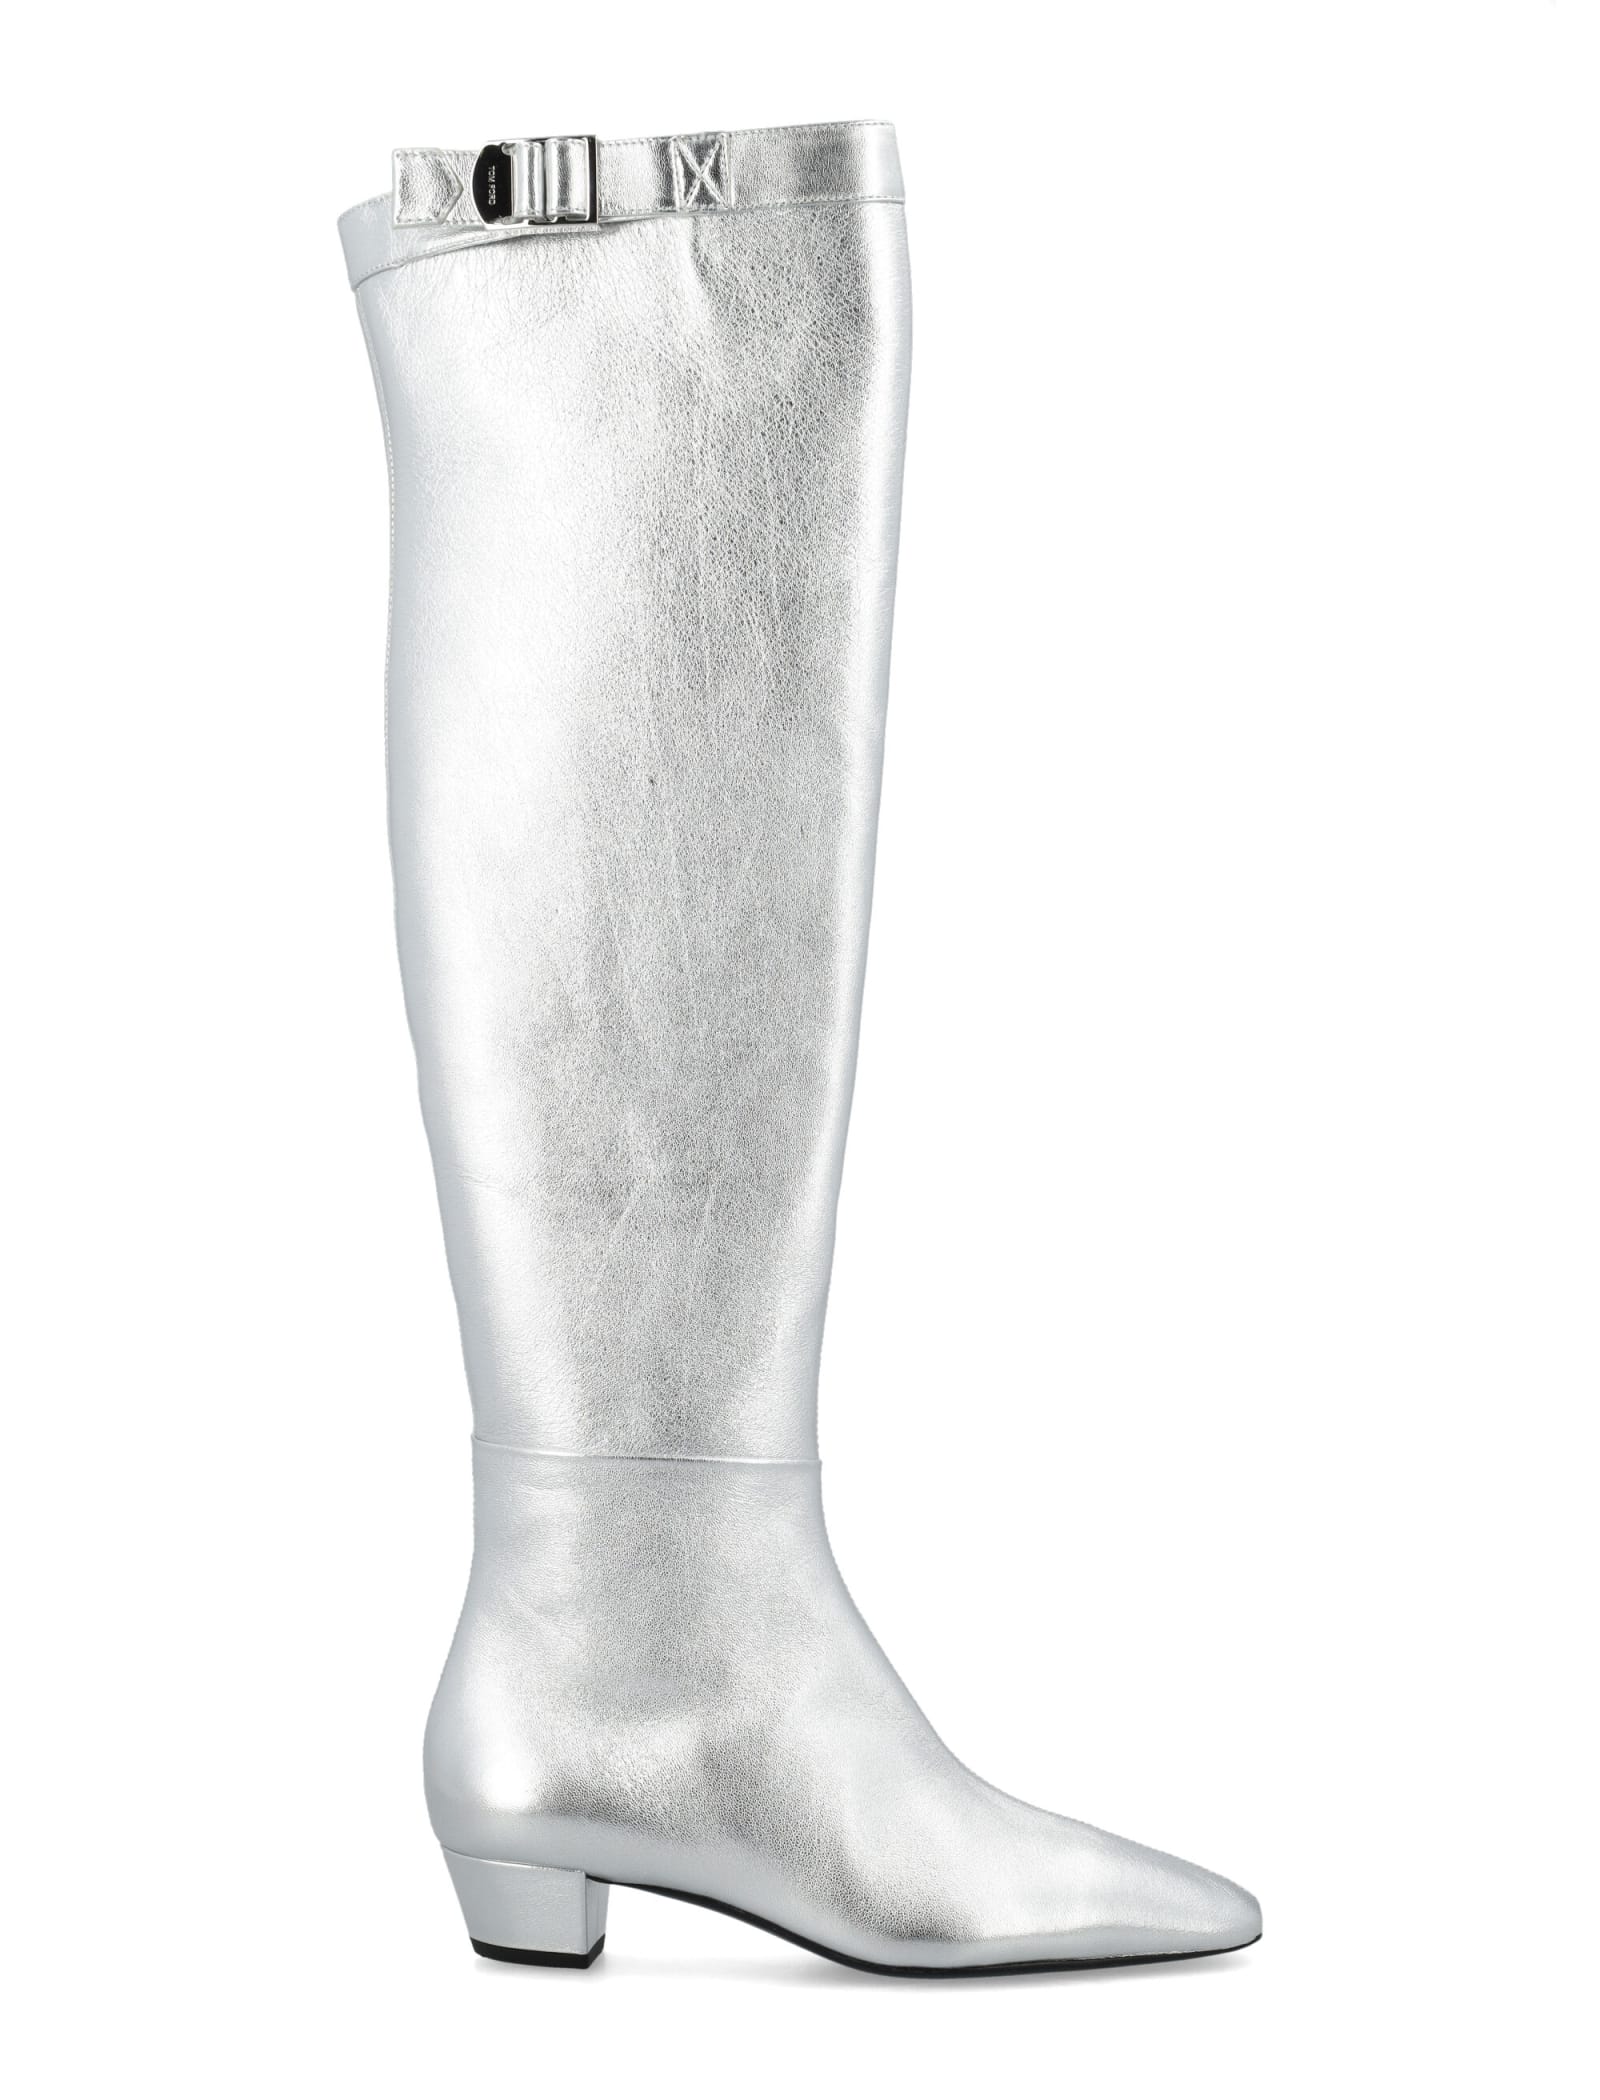 TOM FORD LAMINATED NAPPA LEATHER 90S OVER KNEE BOOT